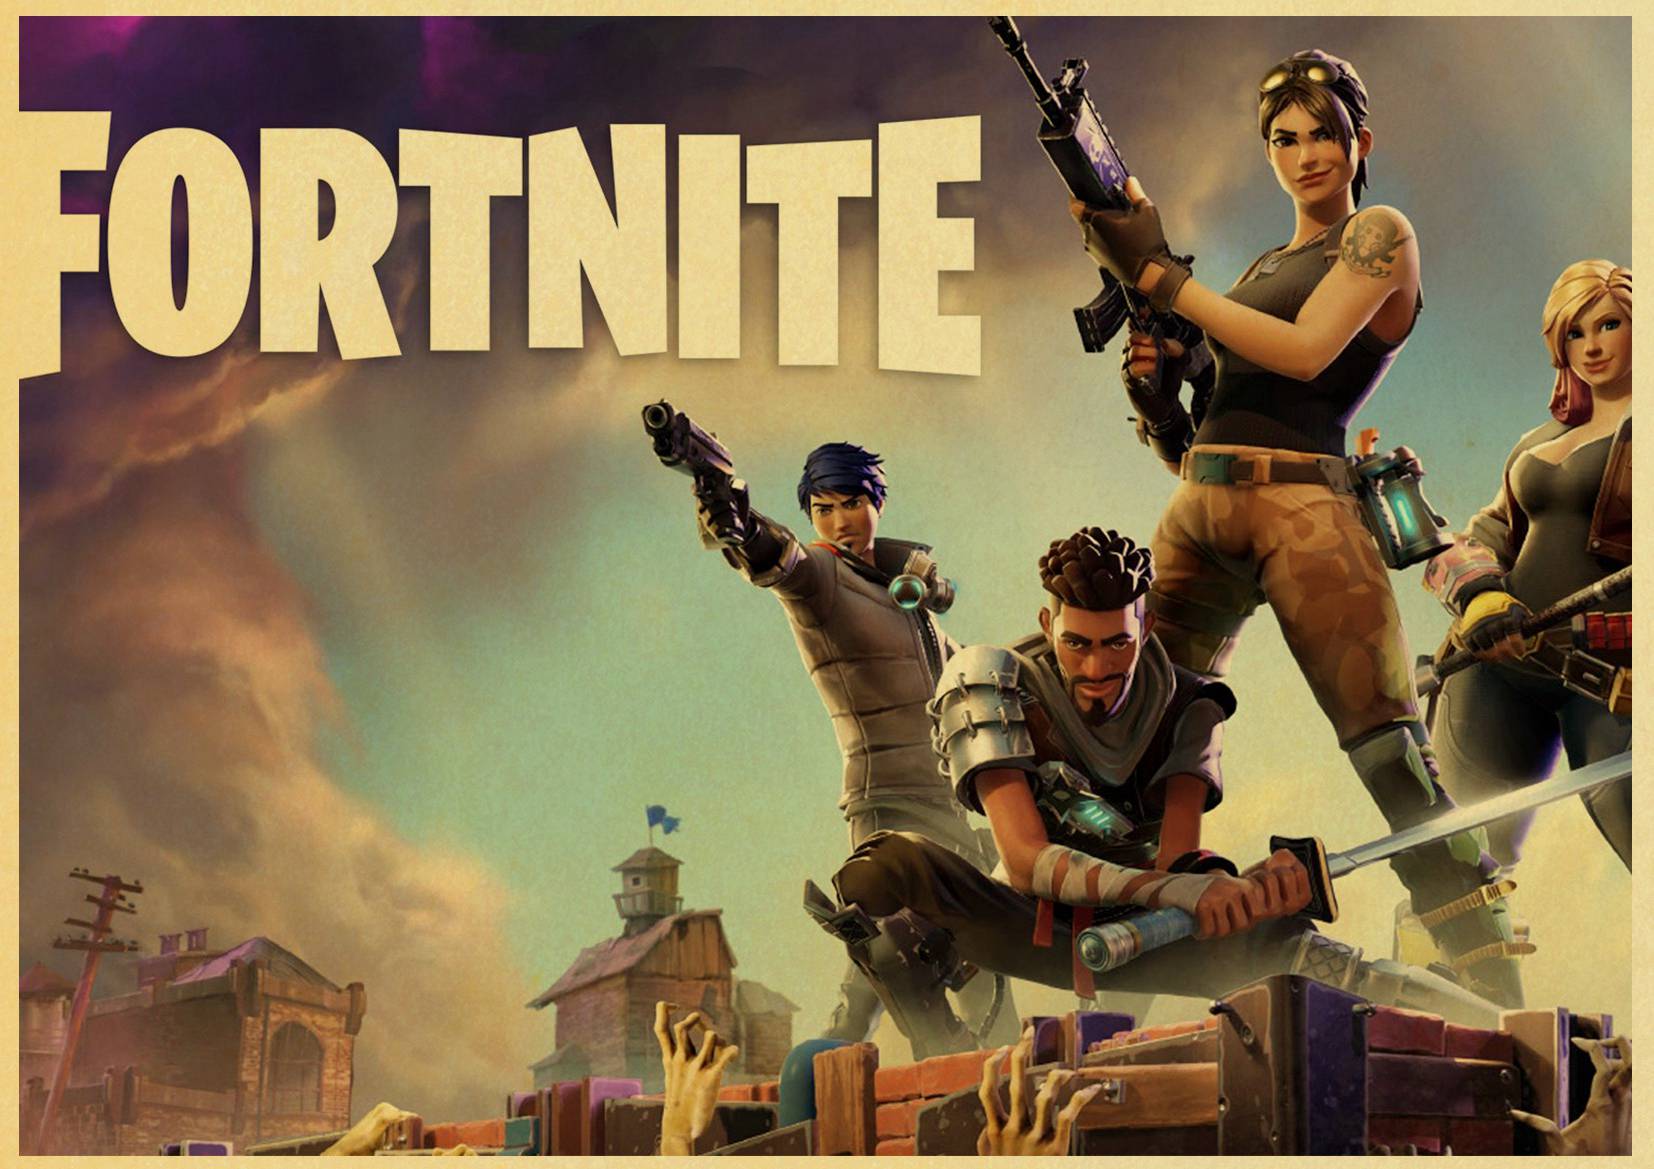 Fortnite Images To Print Free V Bucks No Gift Card - details about fortnite battle royale game canvas wall art print picture roblox gaming raven